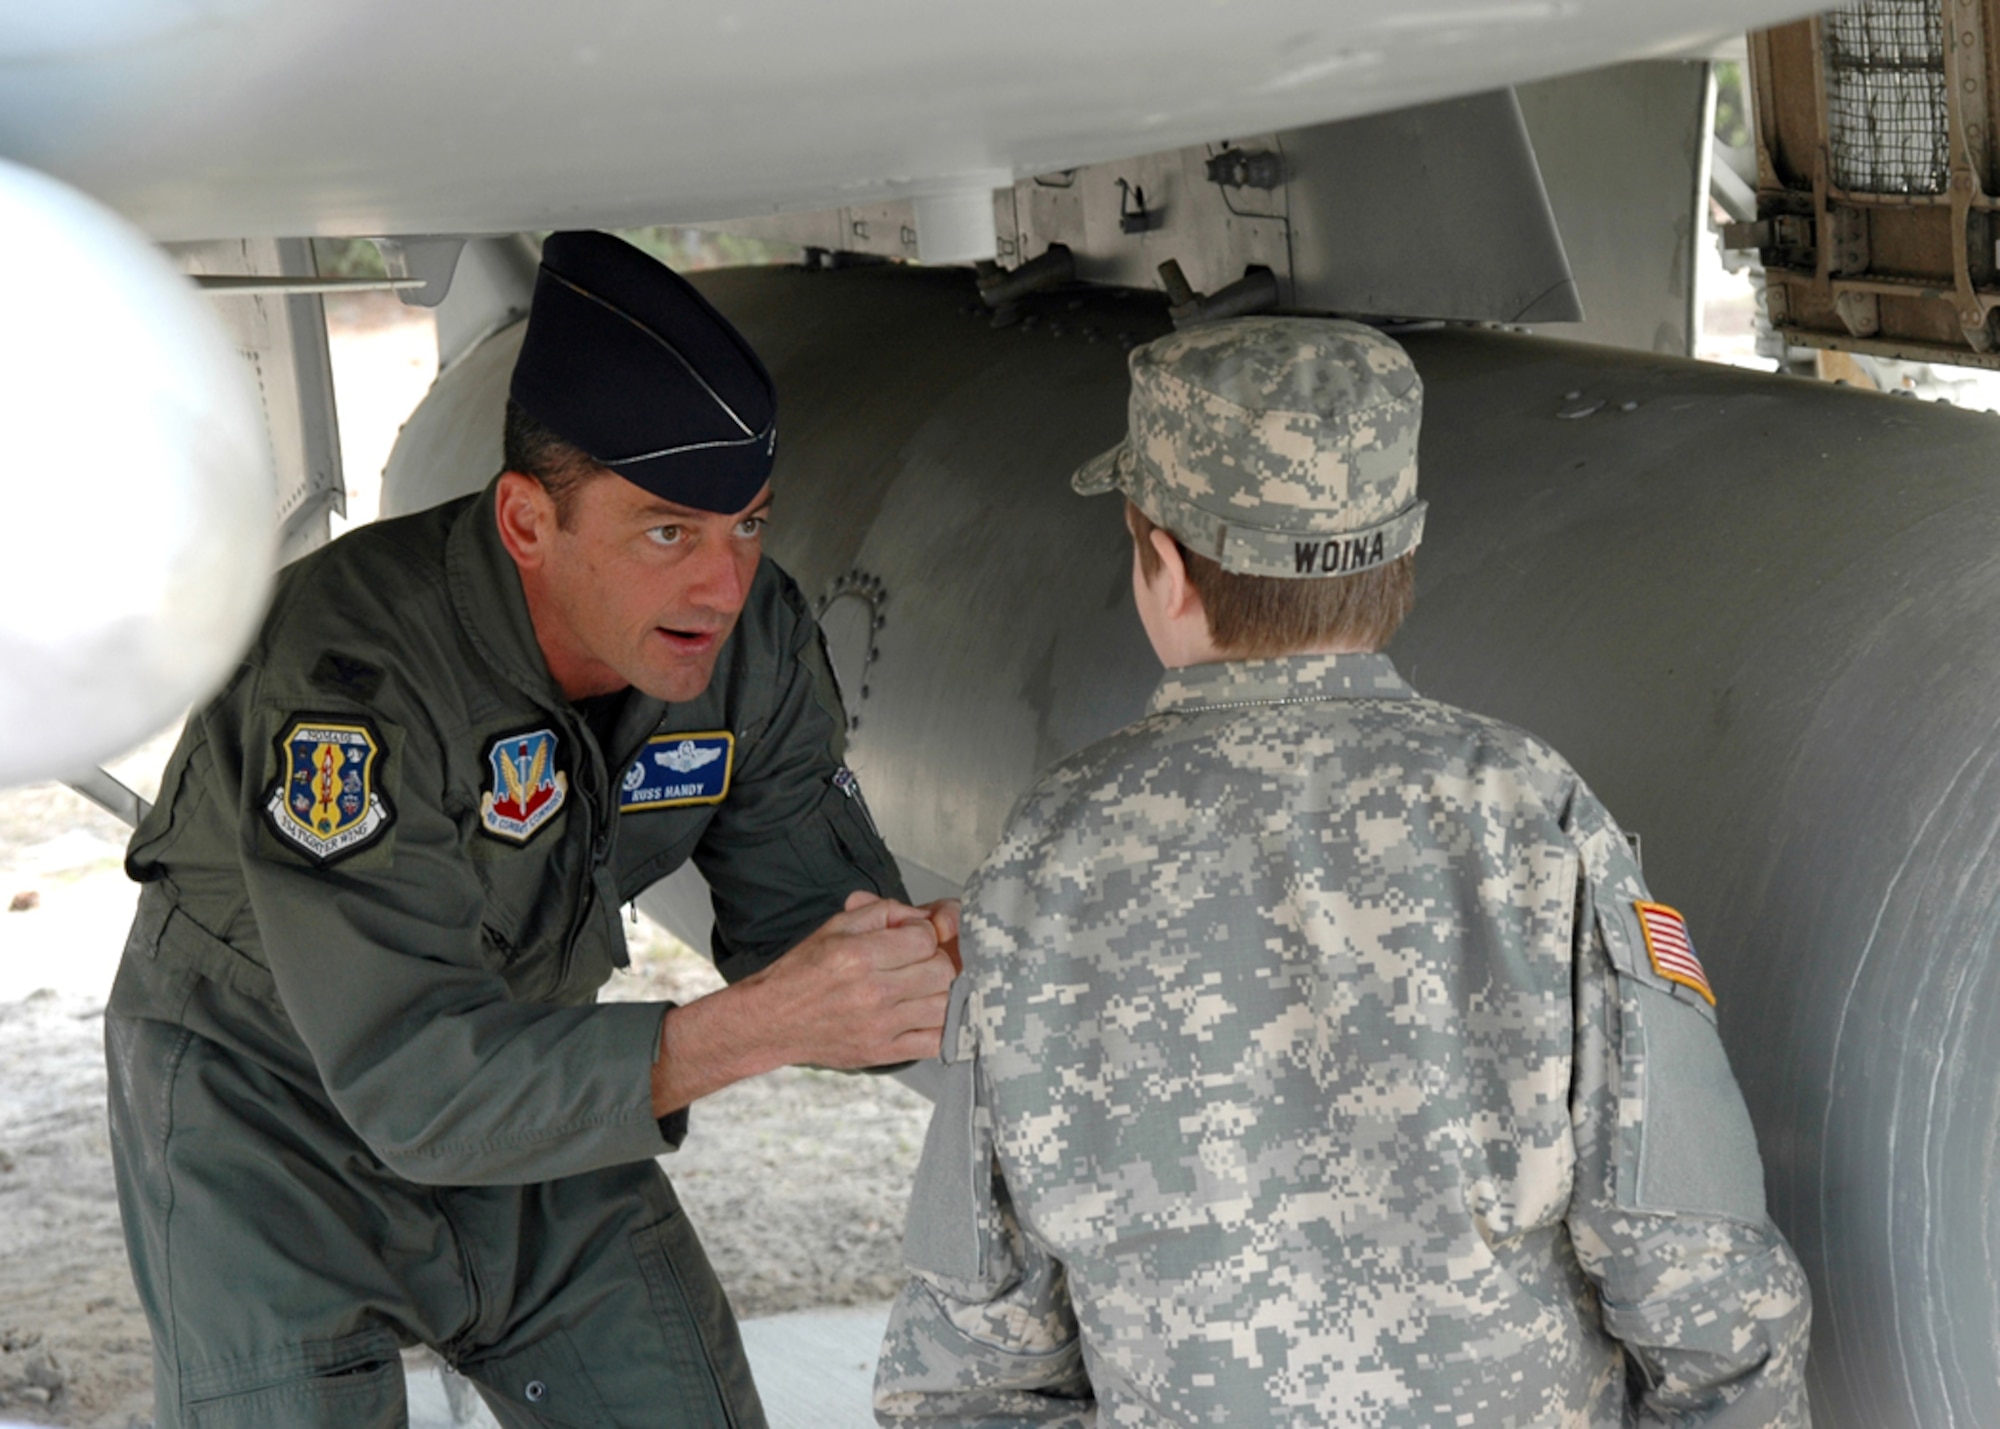 EGLIN AIR FORCE BASE, Fla. -- Col. Russ Handy, 33d Fighter Wing Commander, explains the workings of the F-15C Eagle?s 20mm Gatling gun Feb. 26 to Riley Woina, 14, from Connecticut, who was diagnosed with cystic fibrosis. Riley spent Feb. 19-24 at Eglin Air Force Base with the 6th Ranger Training Battalion as part of the Make-A-Wish Foundation. (USAF photo by Staff Sgt. Bryan Franks)